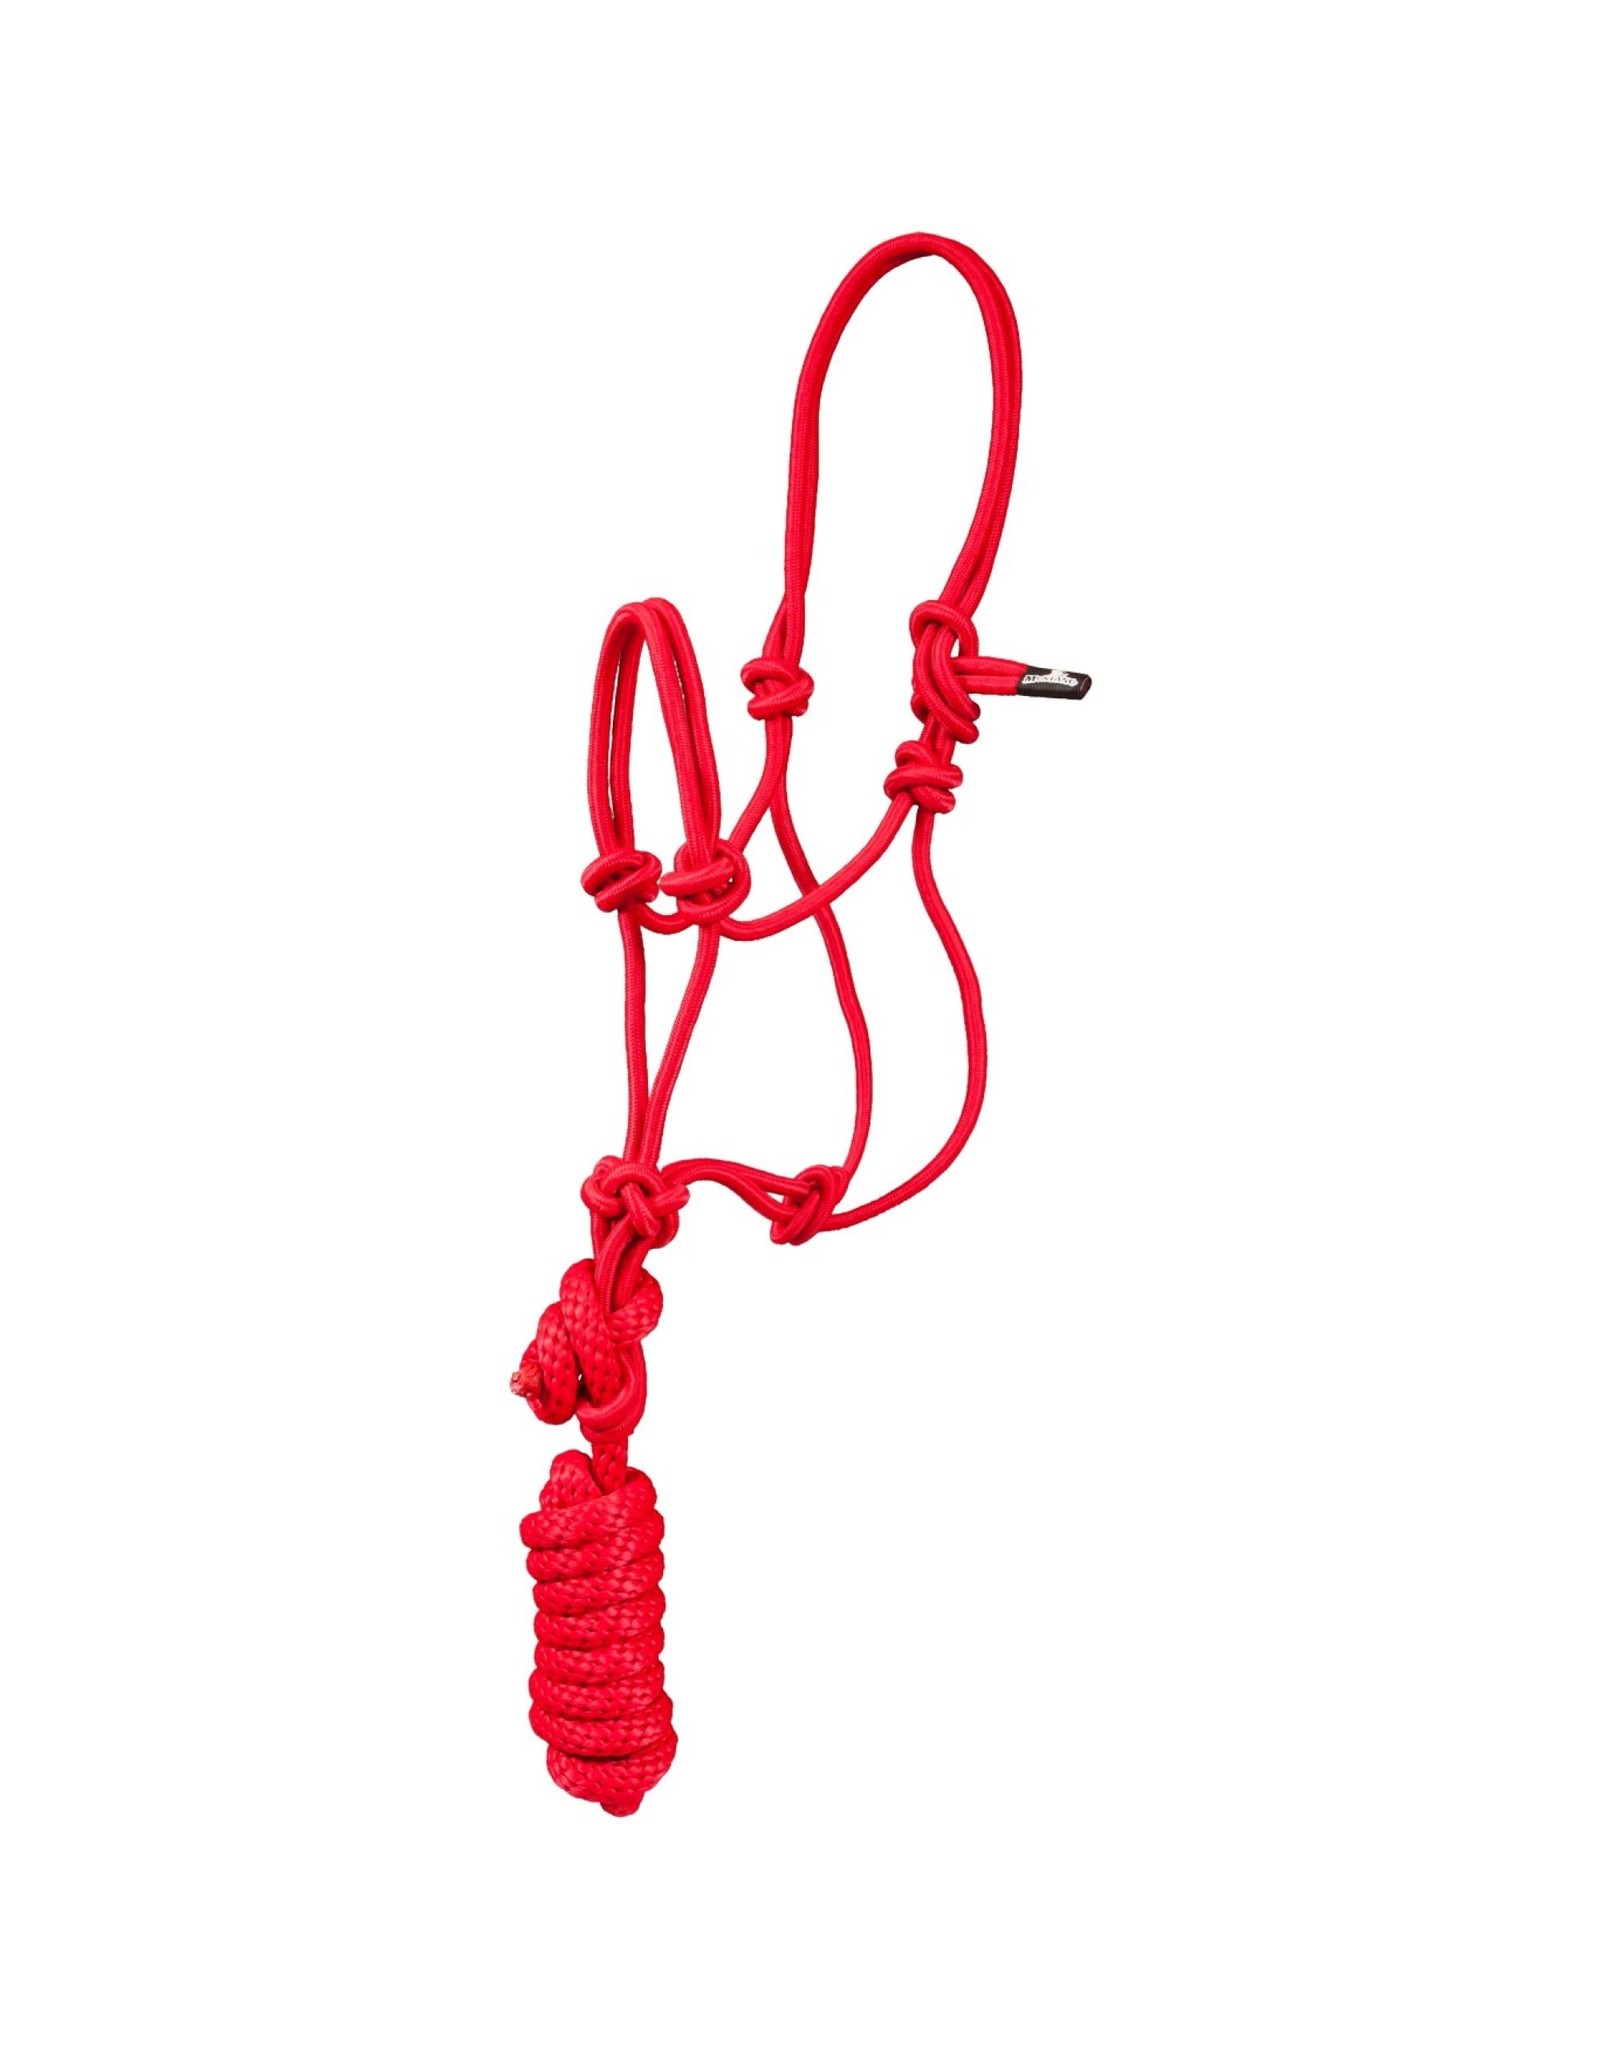 Mustang Mustang Pony/Mini Rope Halter w/ Lead